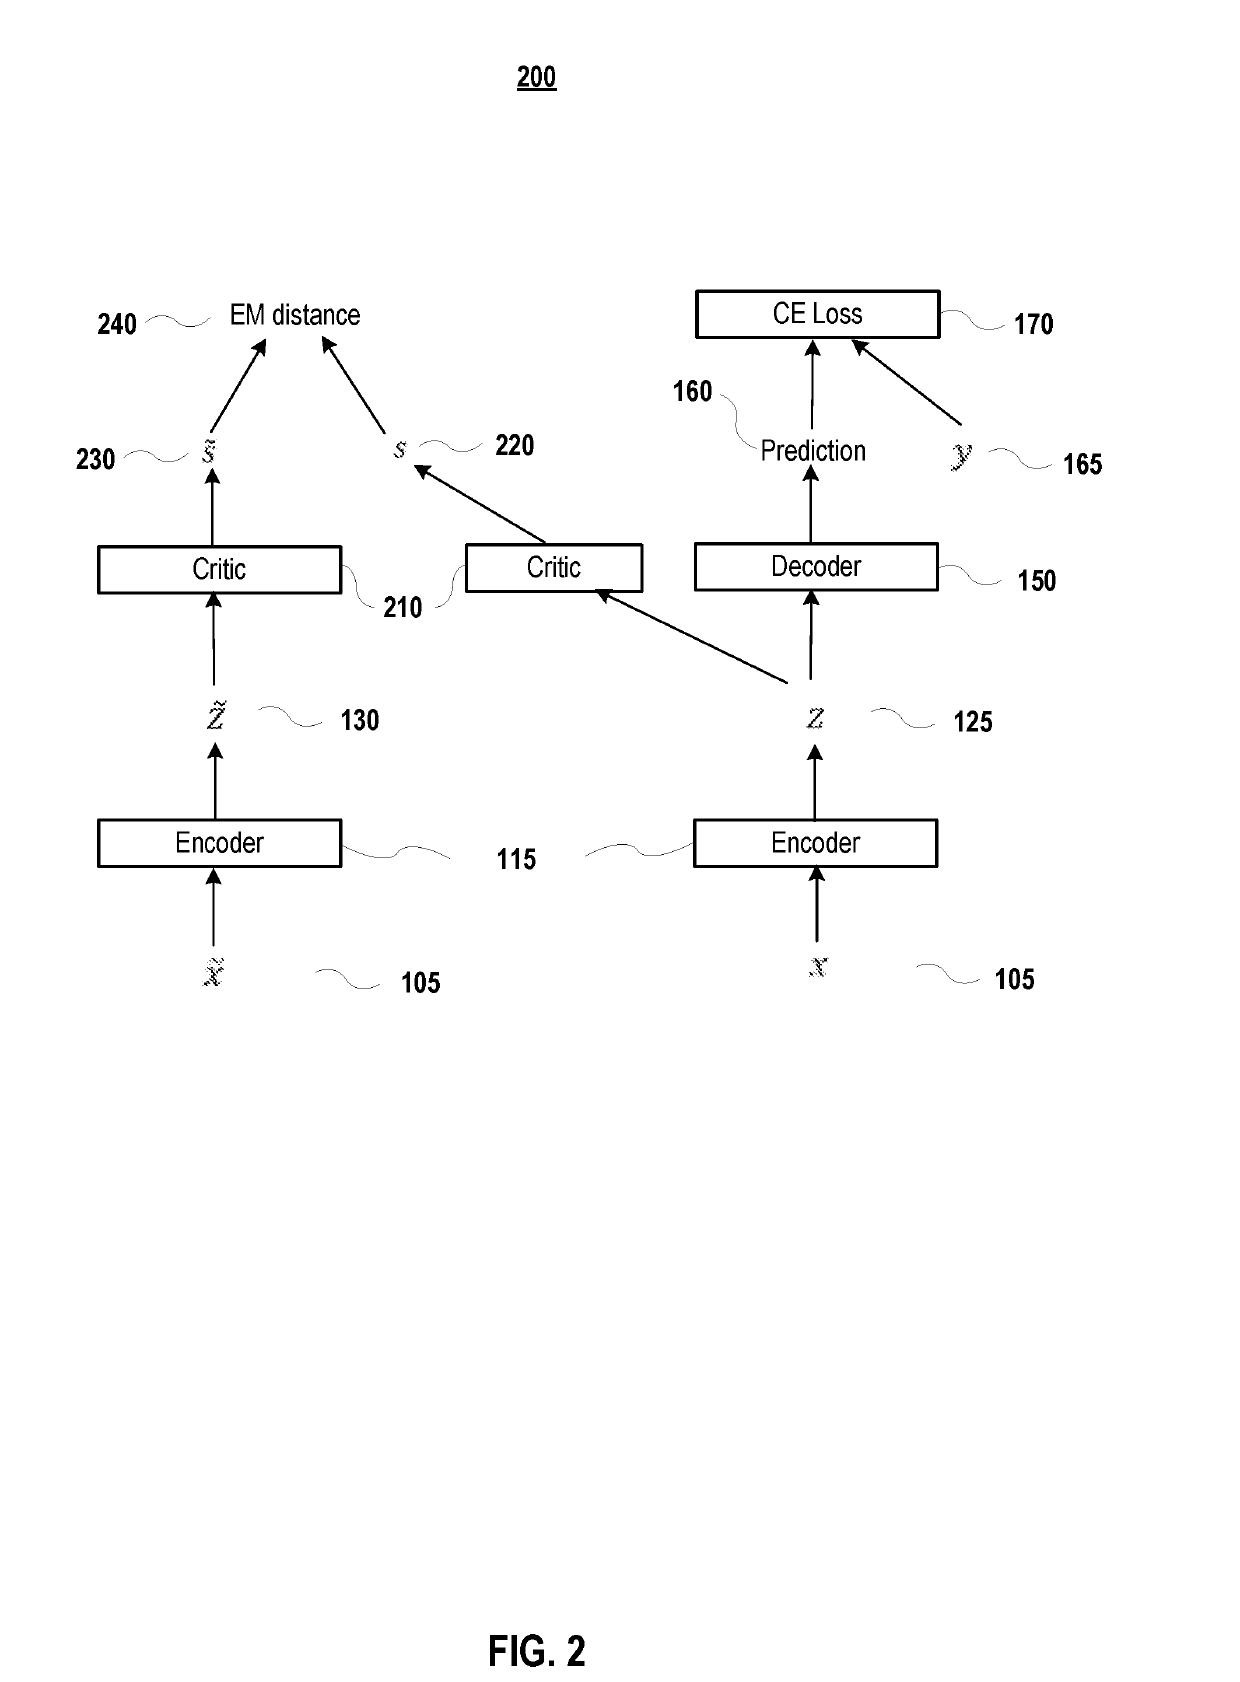 Systems and methods for robust speech recognition using generative adversarial networks